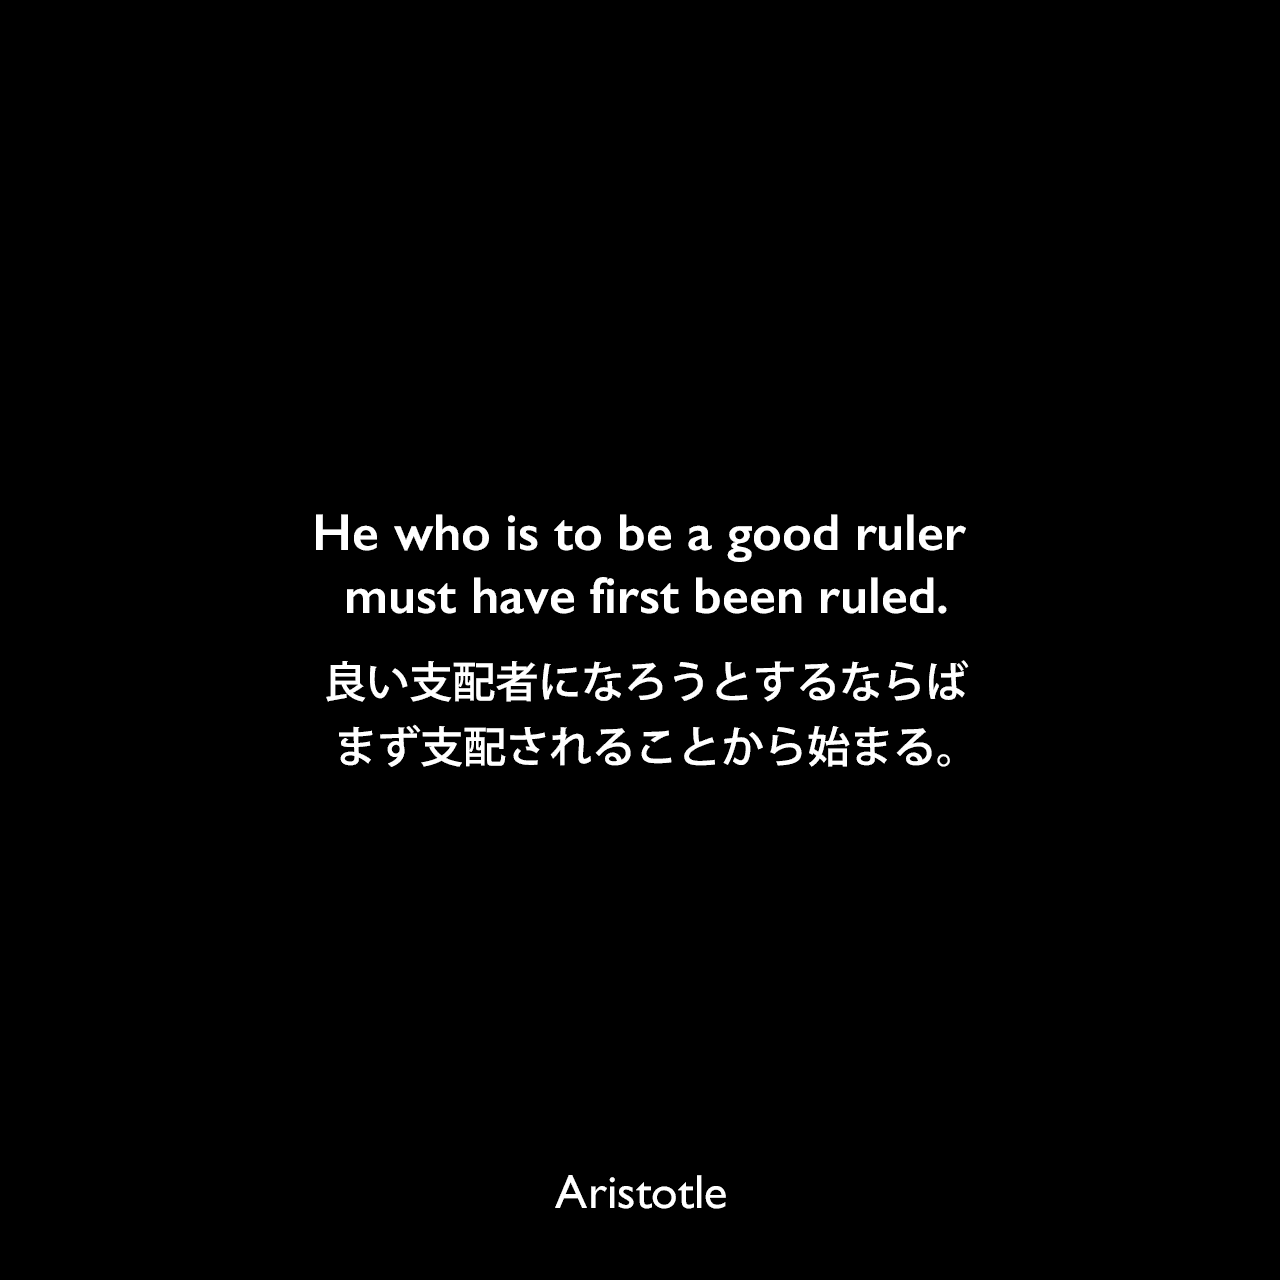 He who is to be a good ruler must have first been ruled.良い支配者になろうとするならば、まず支配されることから始まる。Aristotle